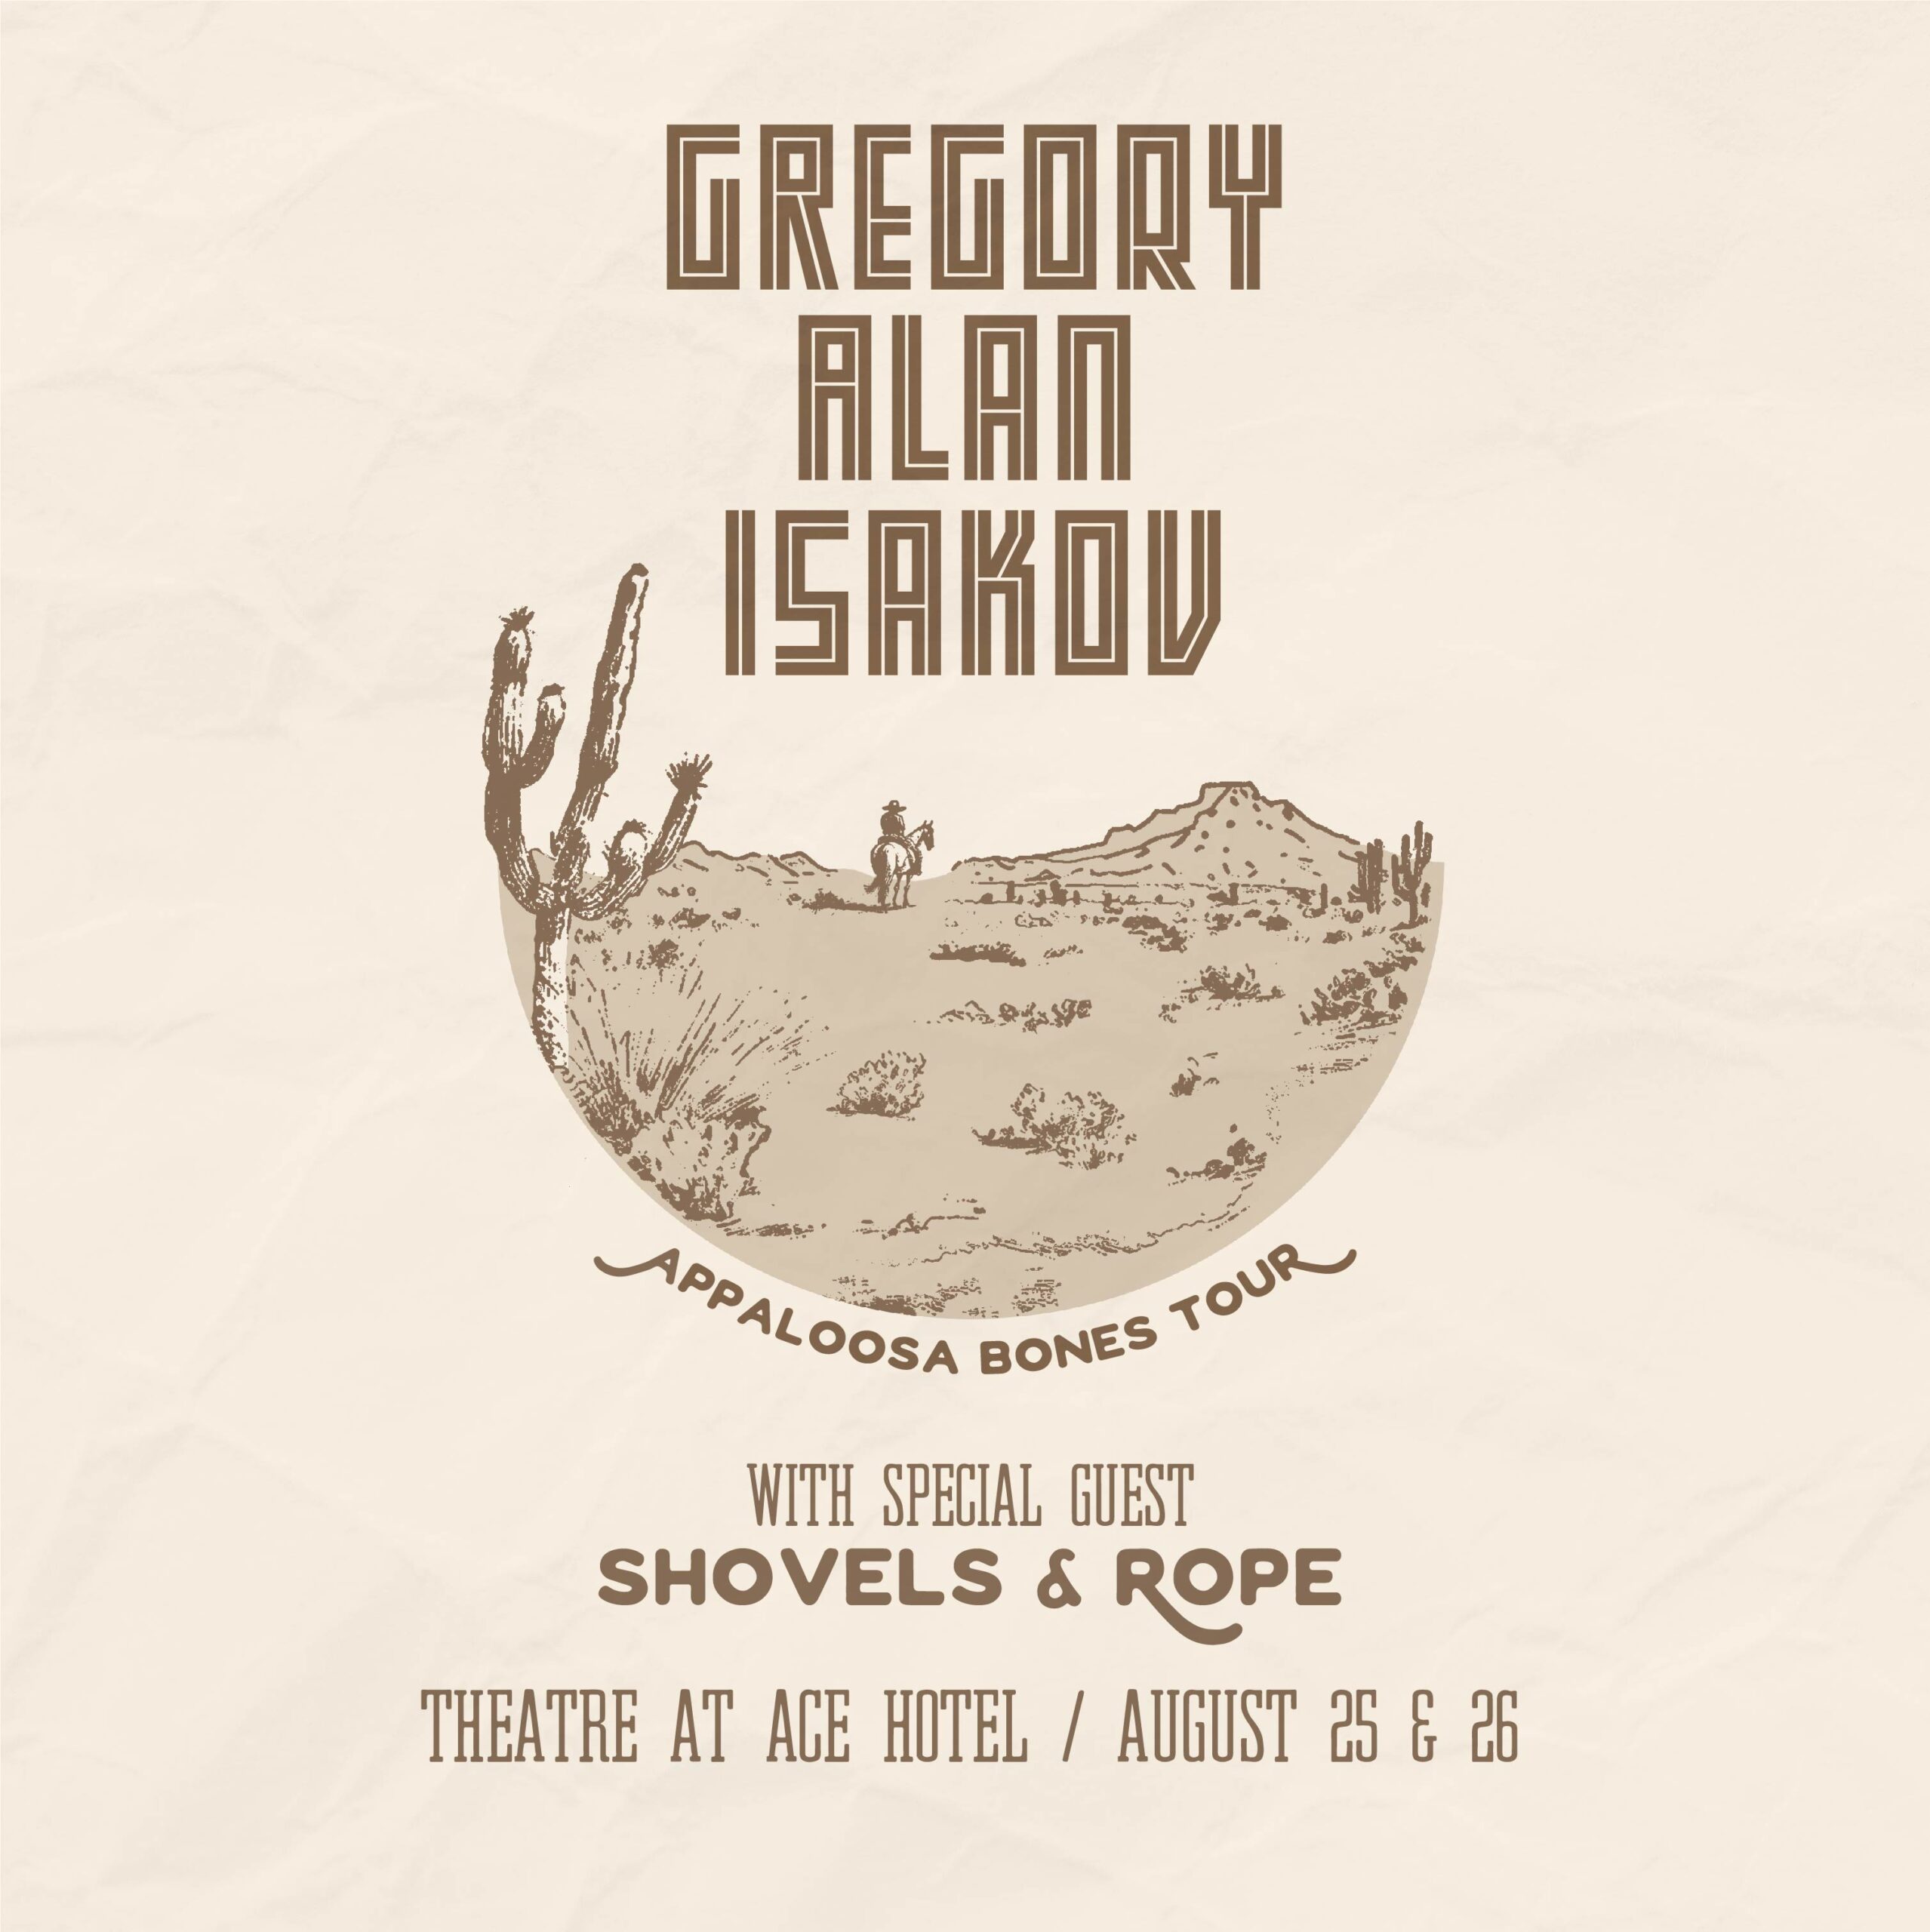 Background: Beige Pictured: Half-Moon like shape, showing a desert with a man and horse riding off in the distance Text: Gregory Alan Isakov Appaloosa Bones Tour with special guest Shovels and Rope Theatre at Ace Hotel / August 25 + 26